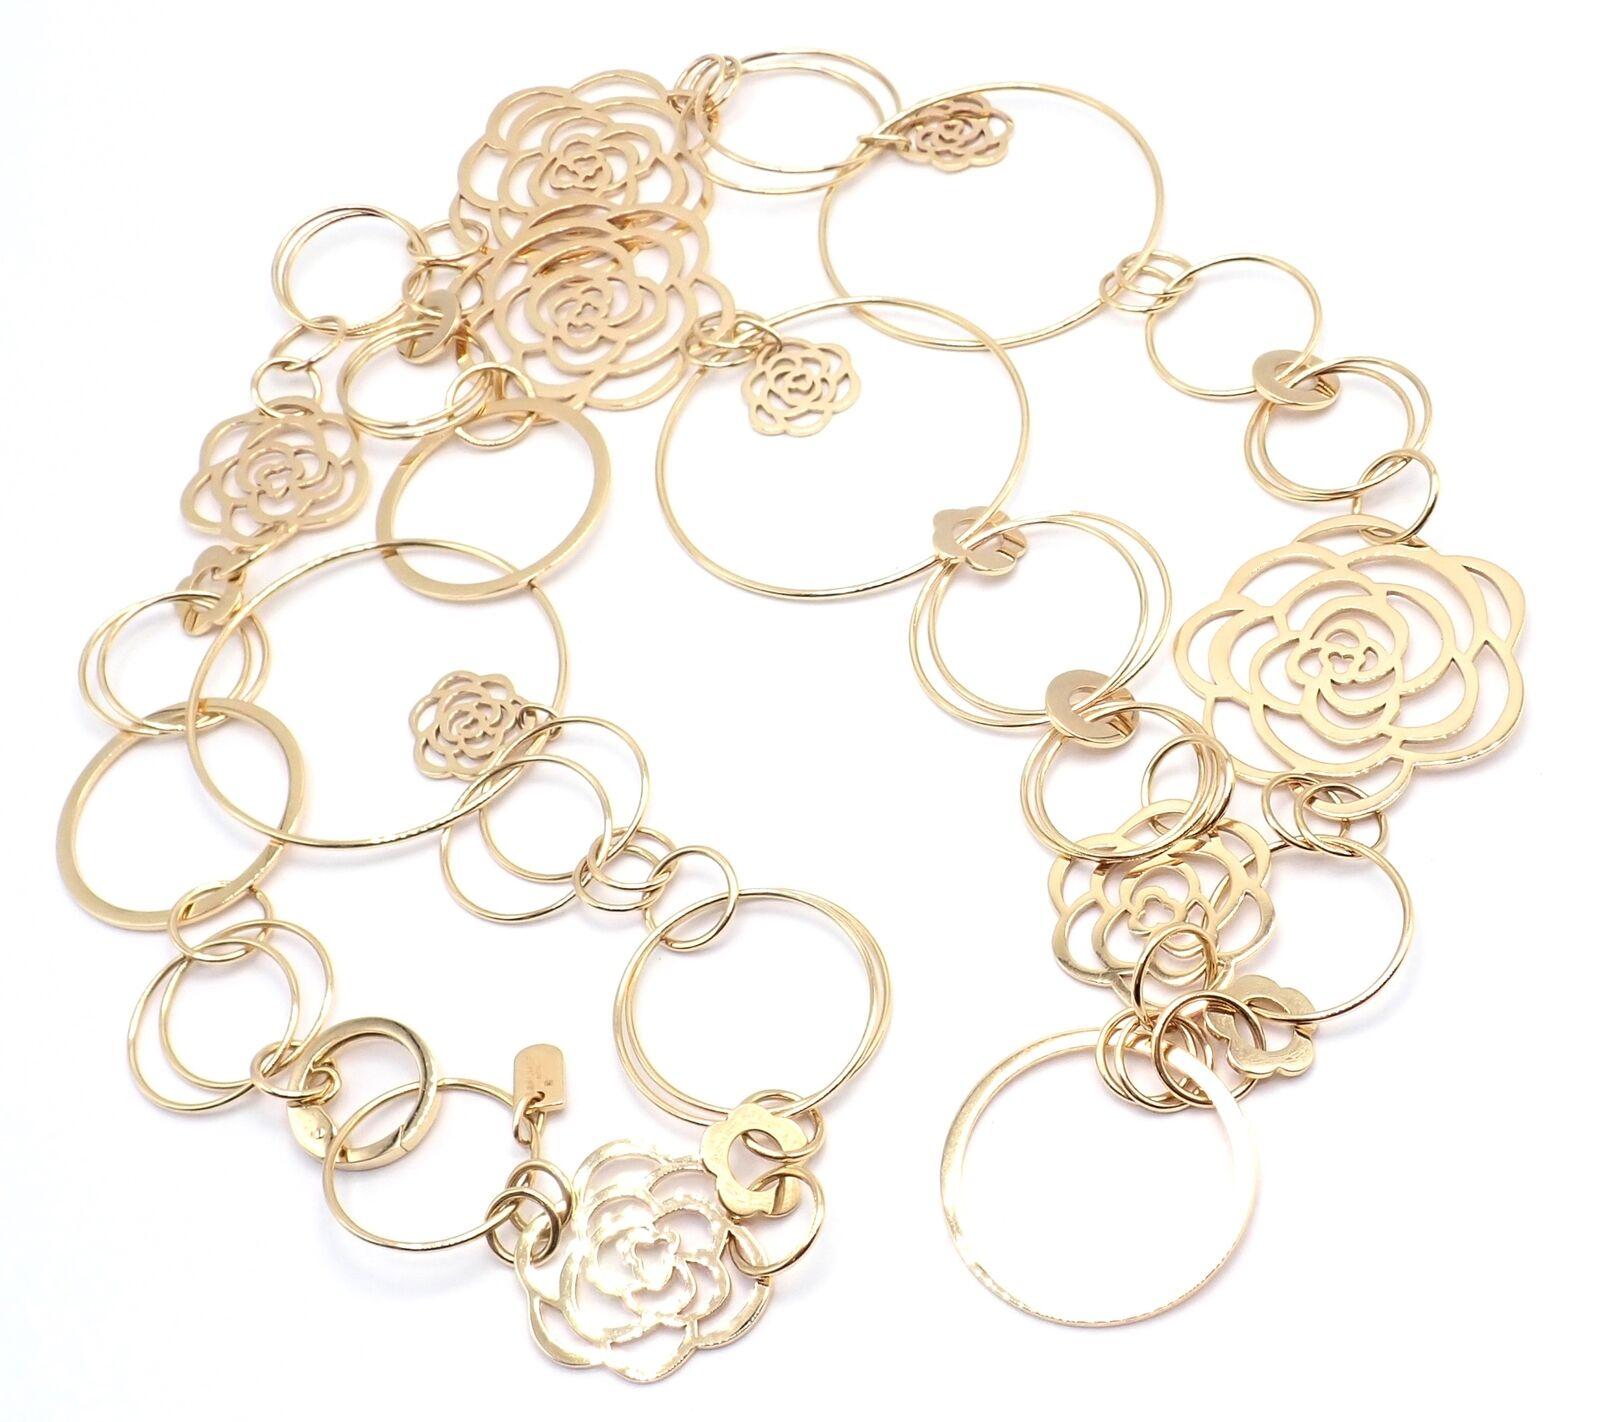 Chanel Camélia Camellia Sautoir Flower Large Version Yellow Gold Link Necklace In Excellent Condition For Sale In Holland, PA